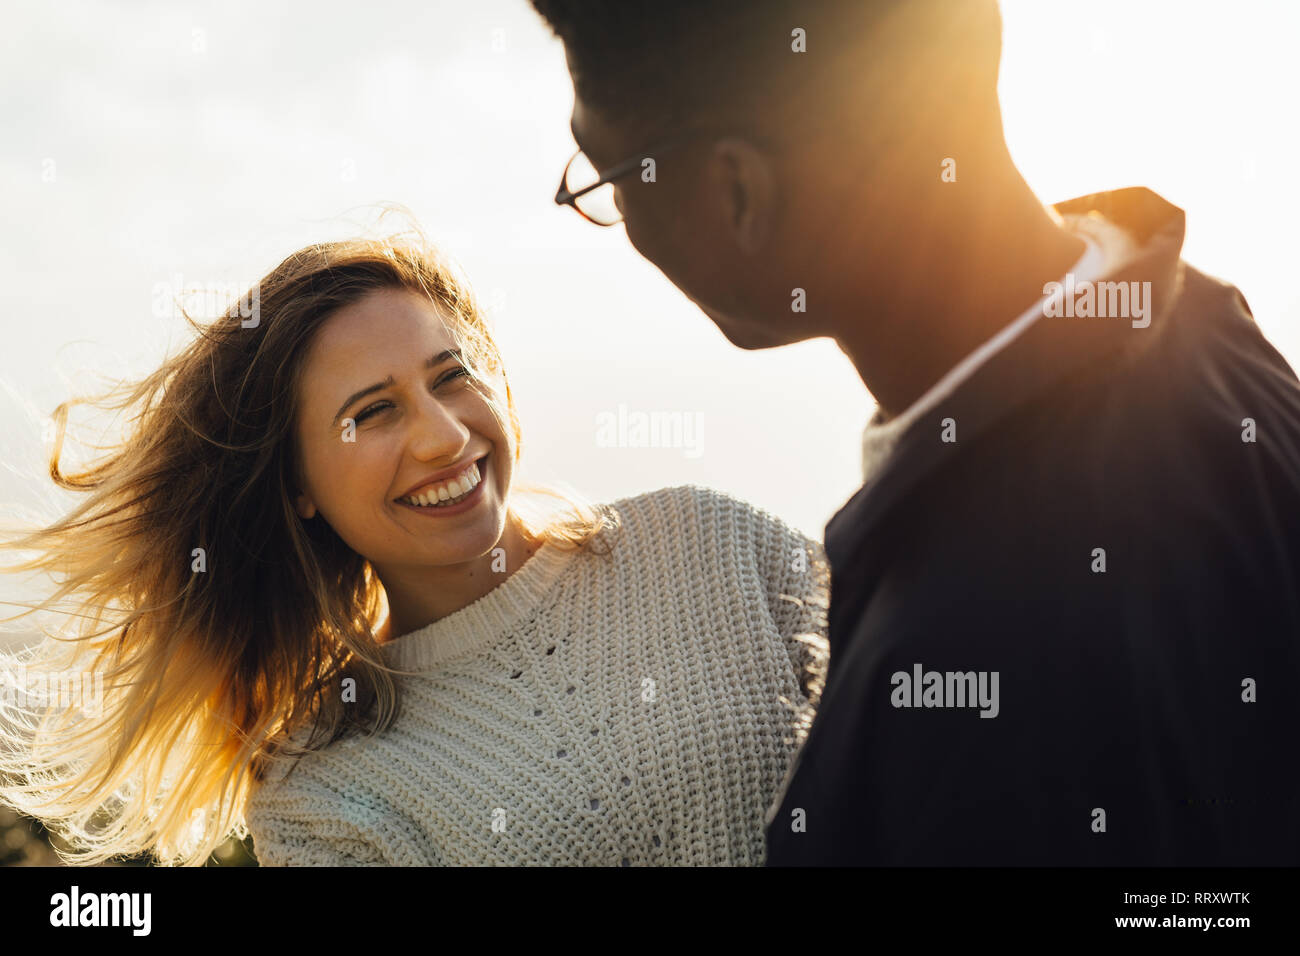 Smiling woman looking at her boyfriend. Couple enjoying outdoors on a sunny day. Stock Photo